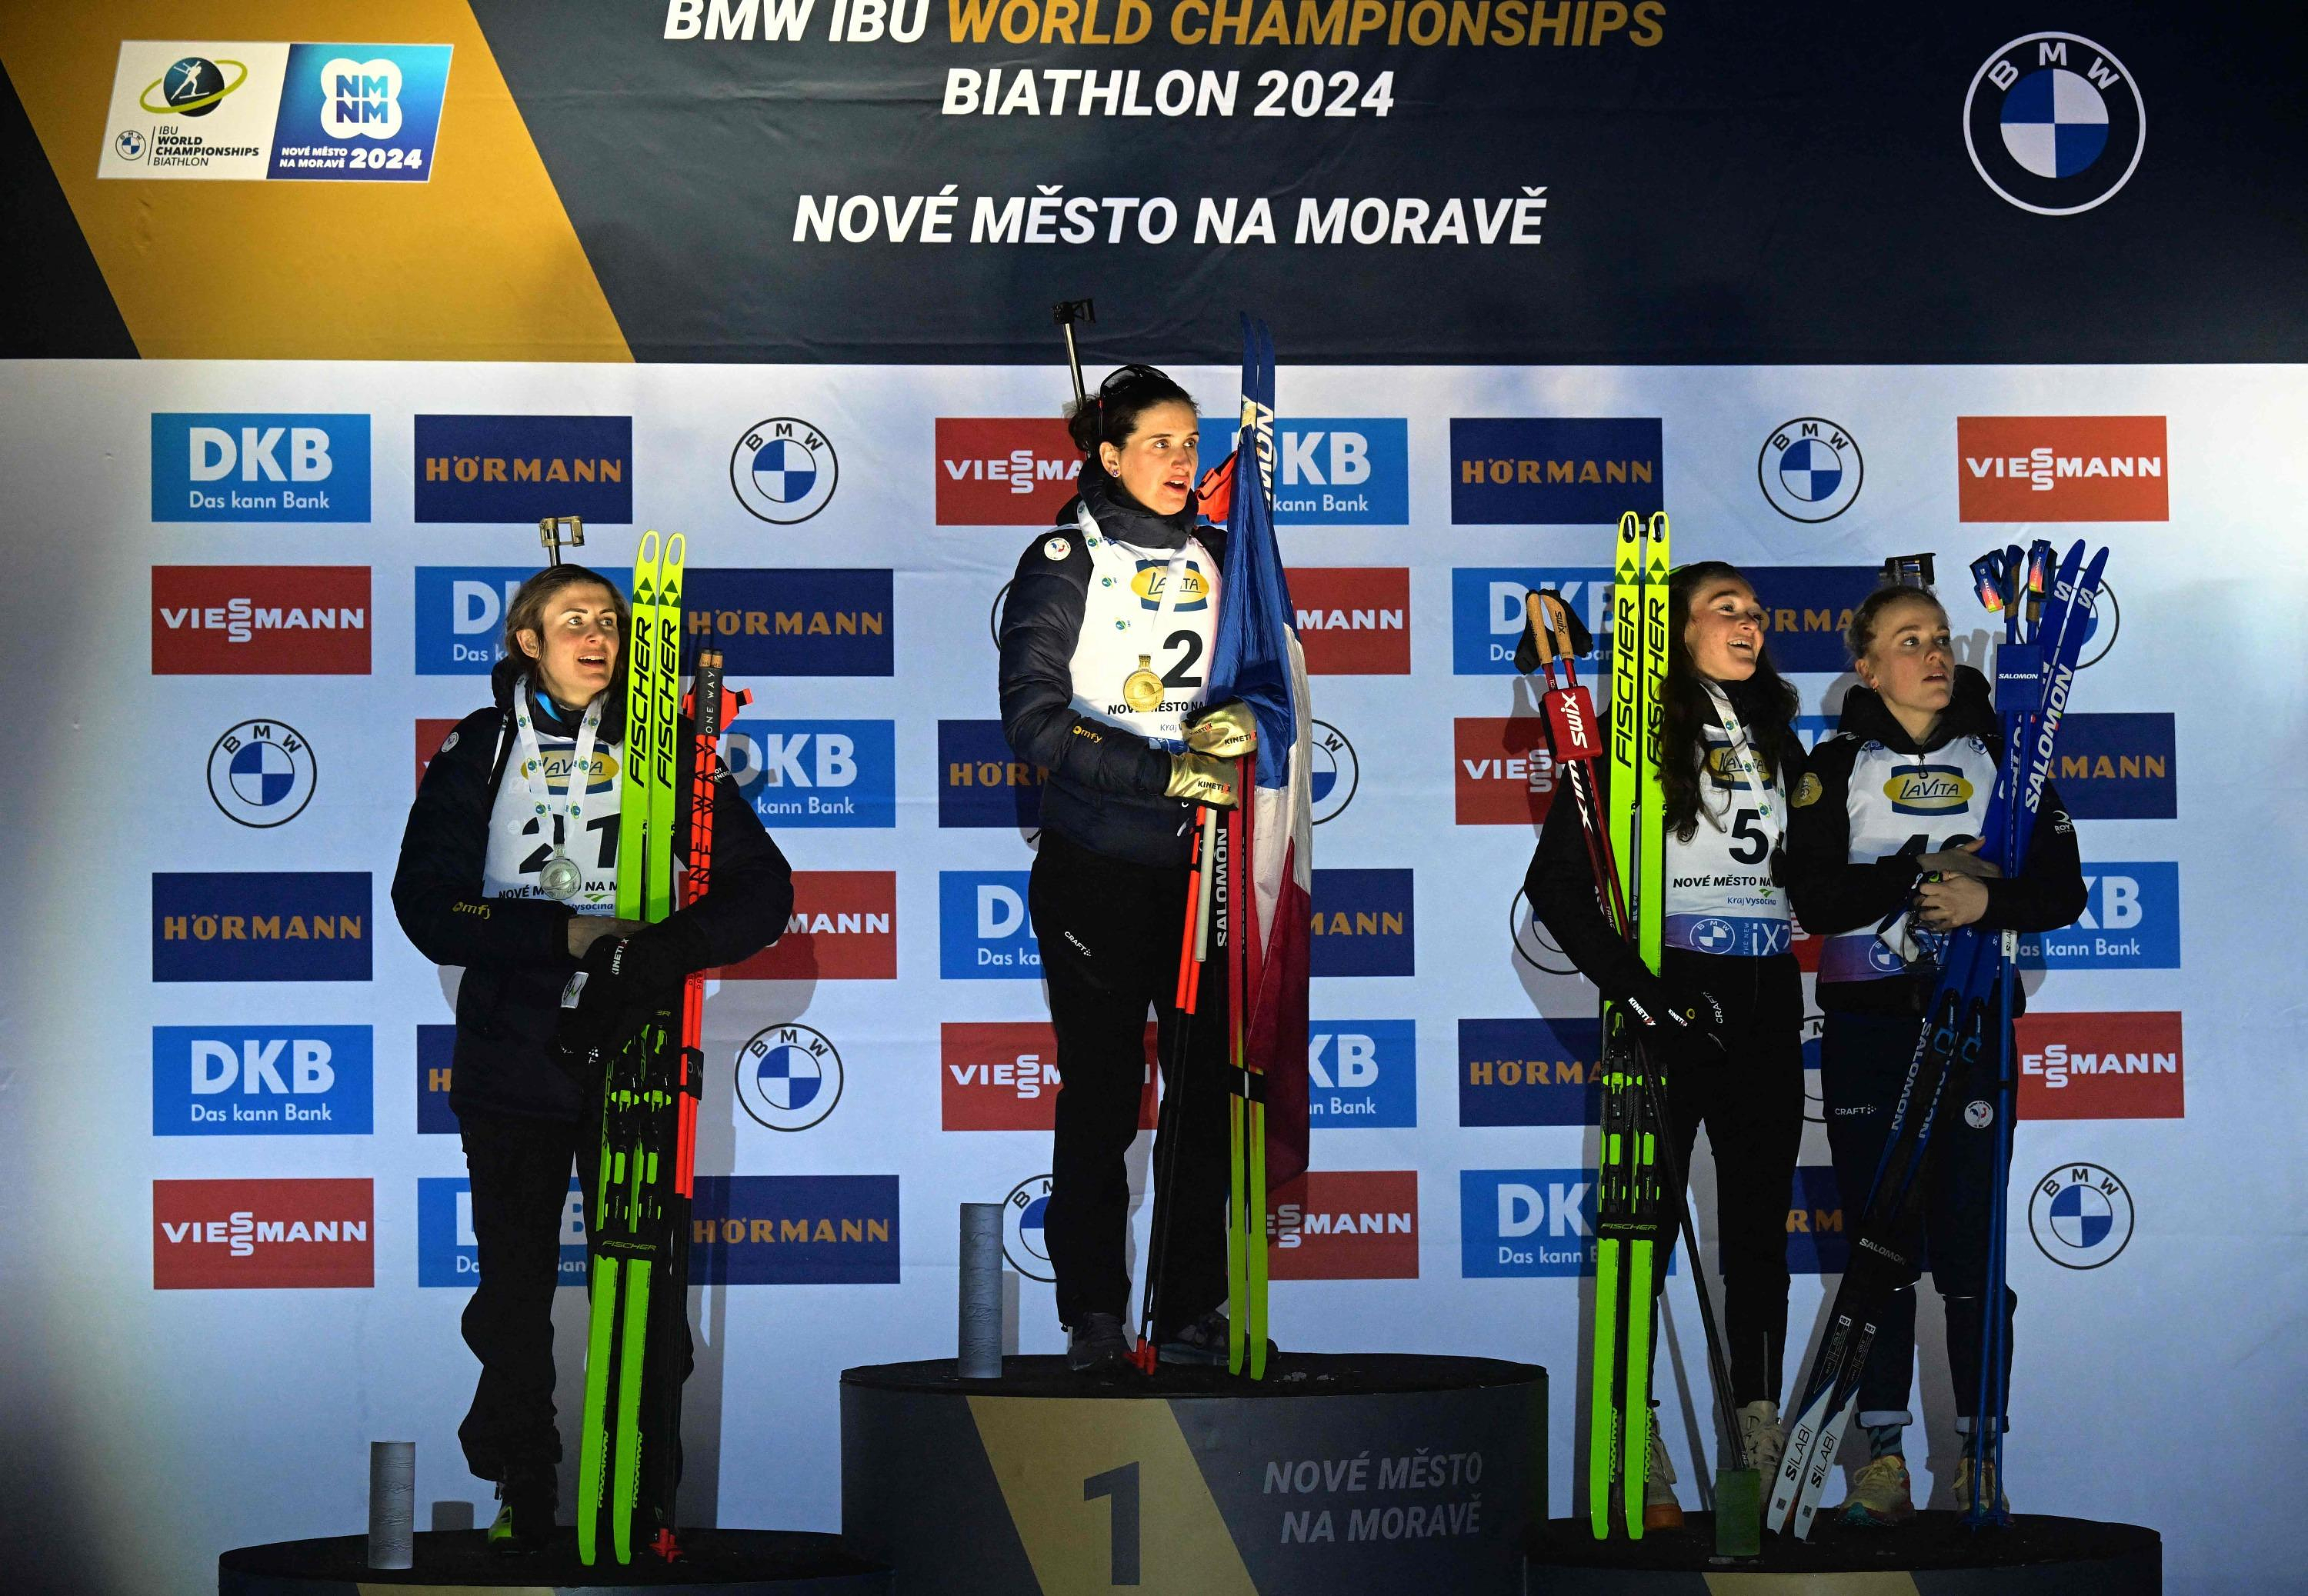 Biathlon: the magnificent Marseillaise with the 100% French podium at the Worlds